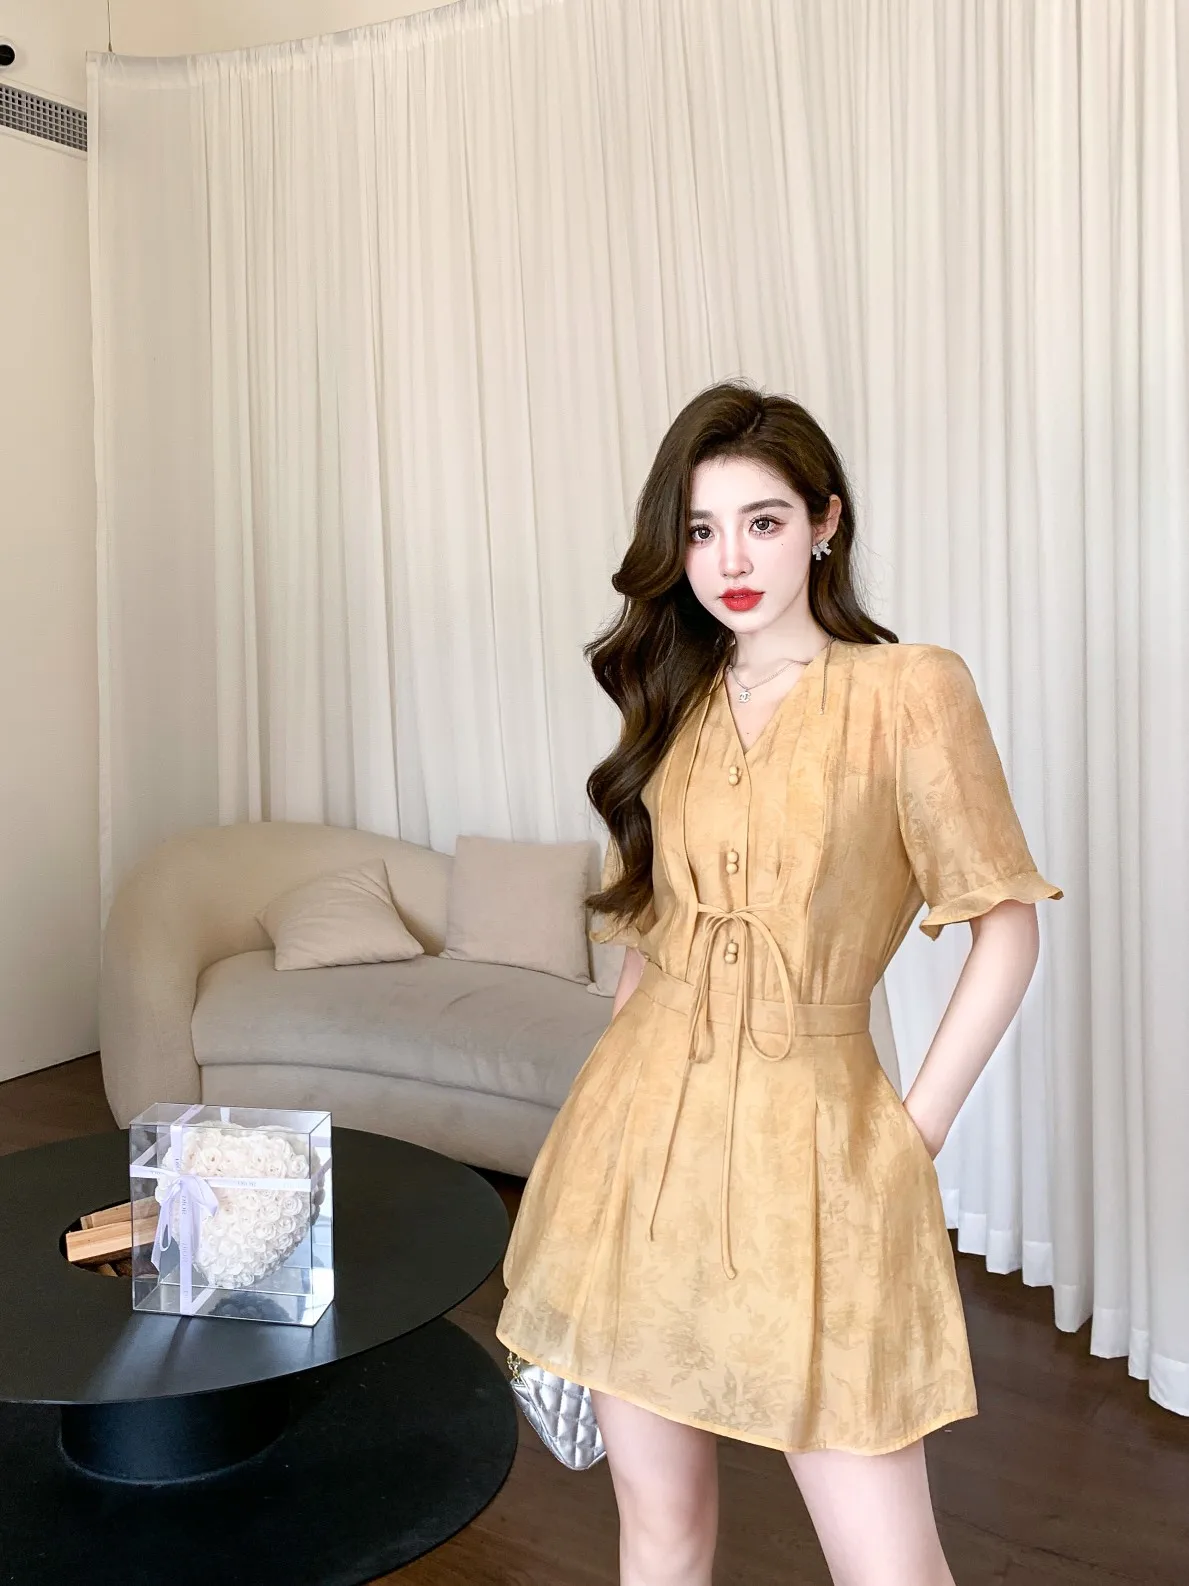 

2023 spring and summer women's clothing fashion new Lace-up Loose Multi-Button Top Two-Piece Overskirt Suit 0612